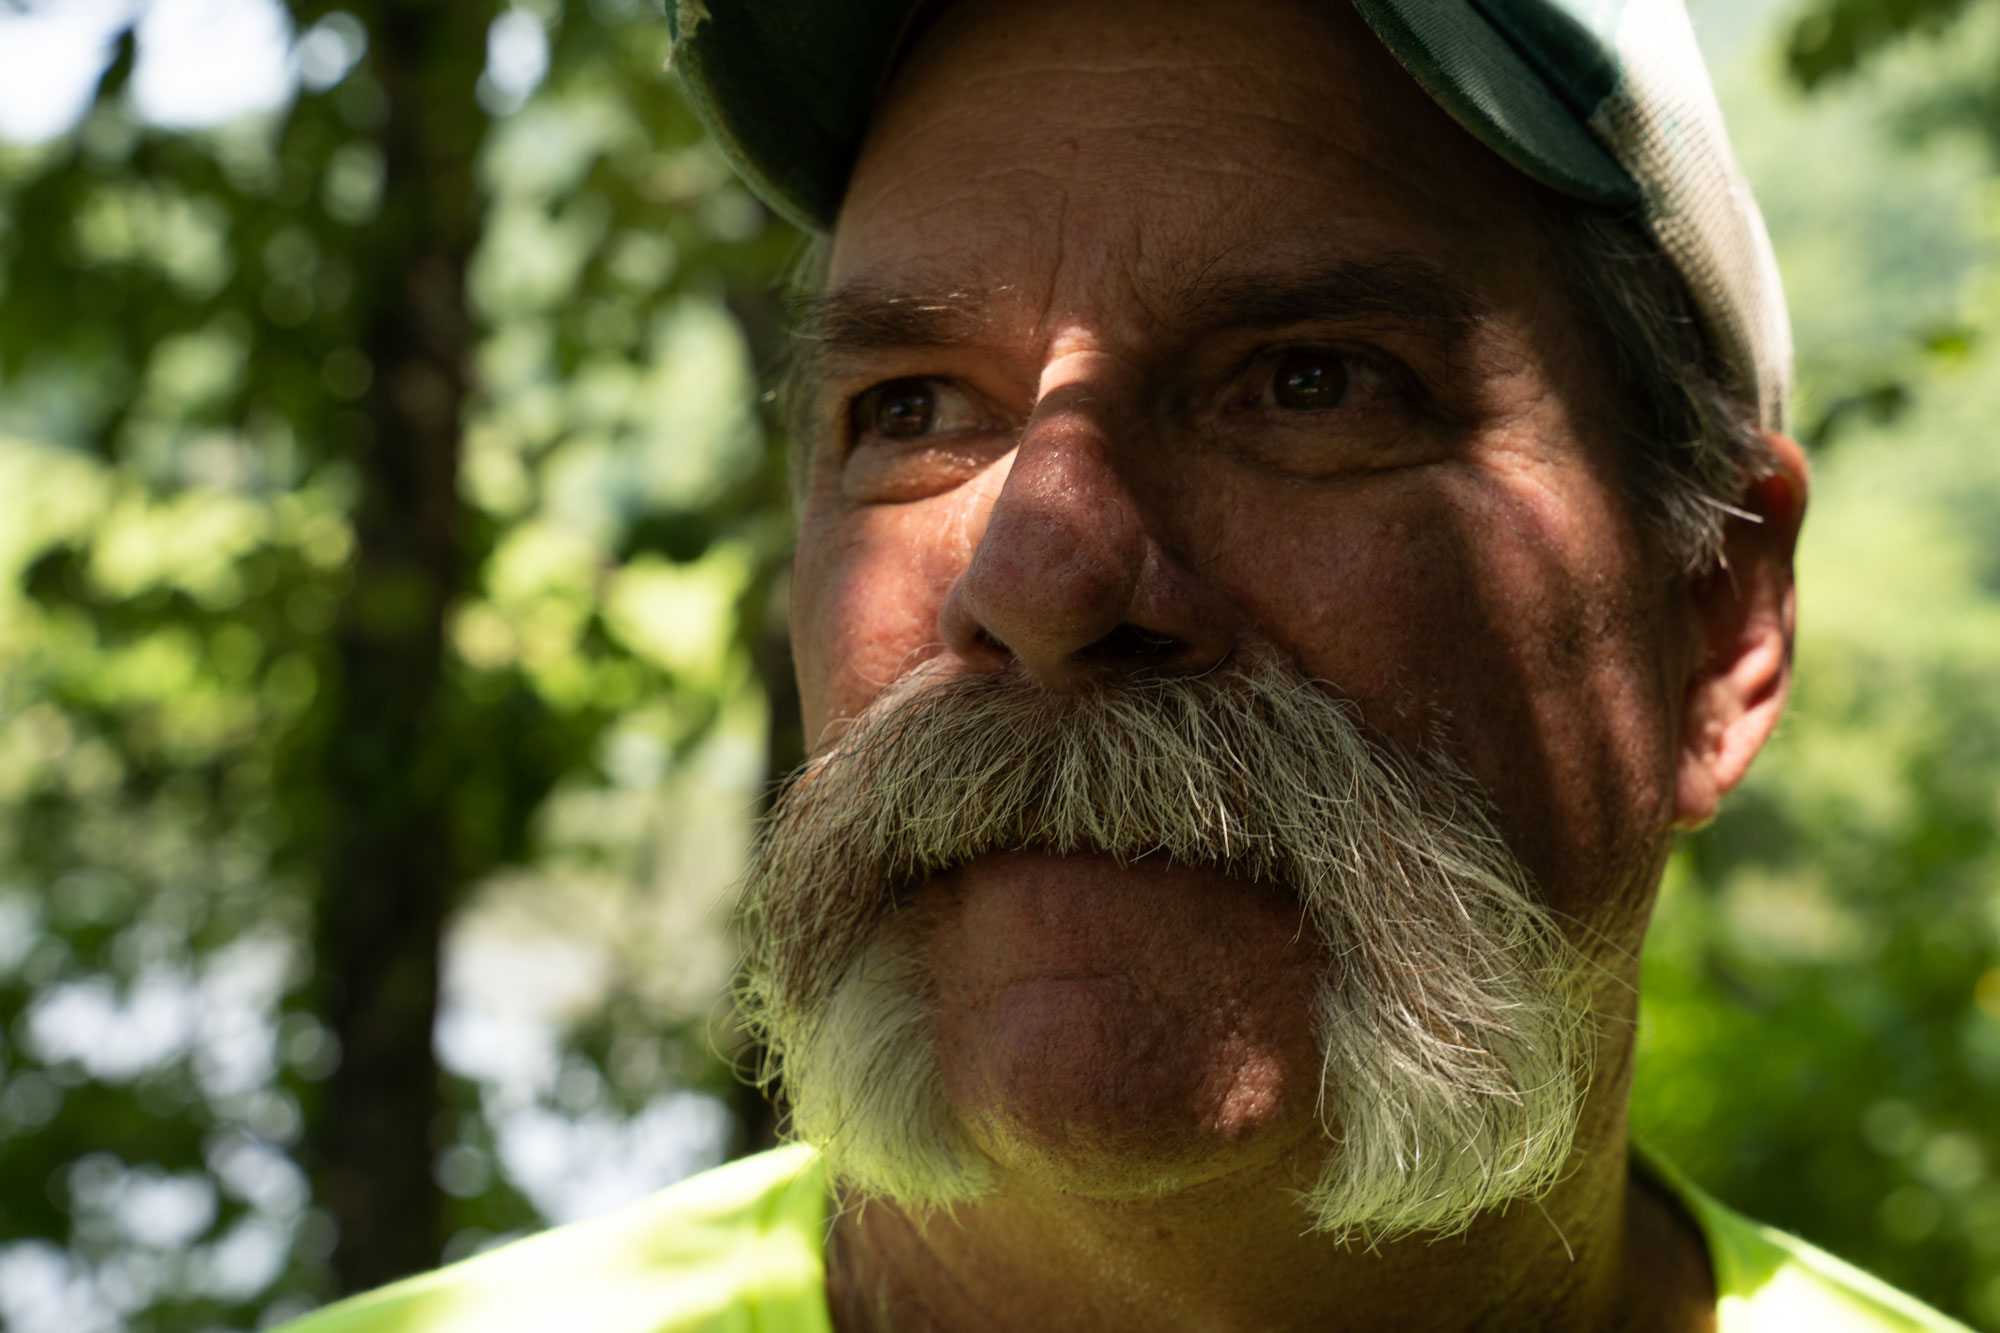 A man with a large mustache looks into the distance.